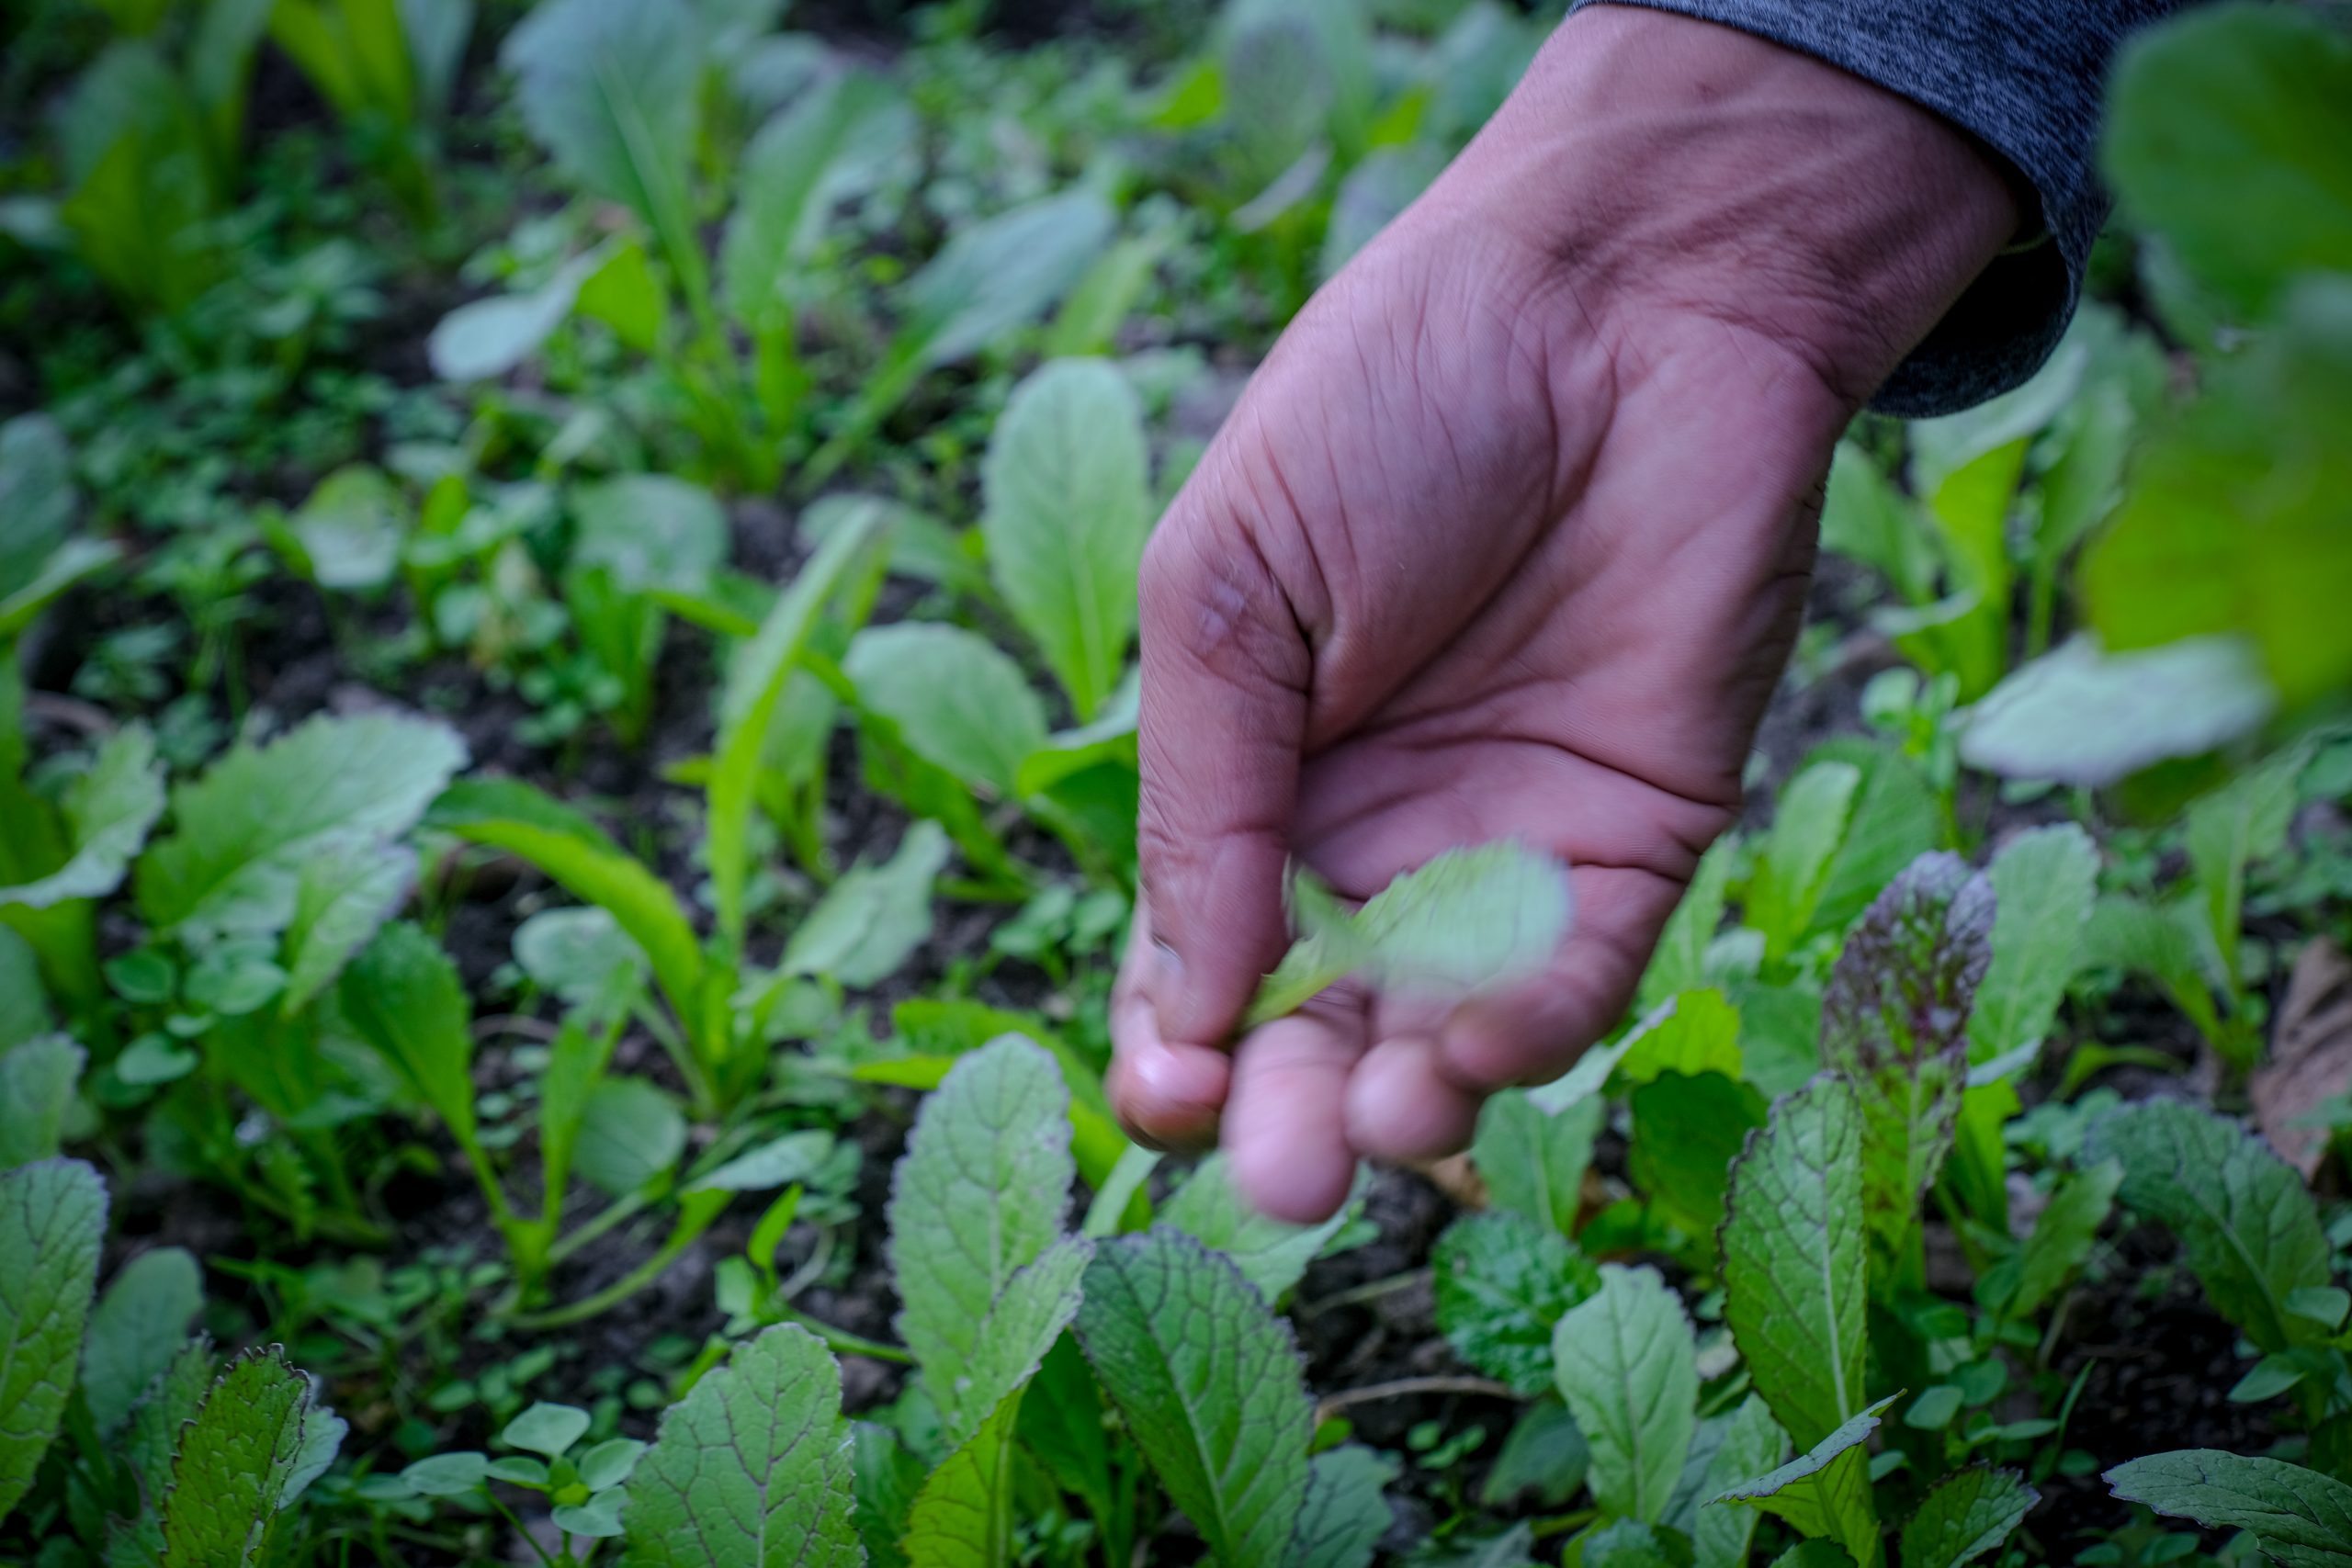 A farmer collecting edible leaves